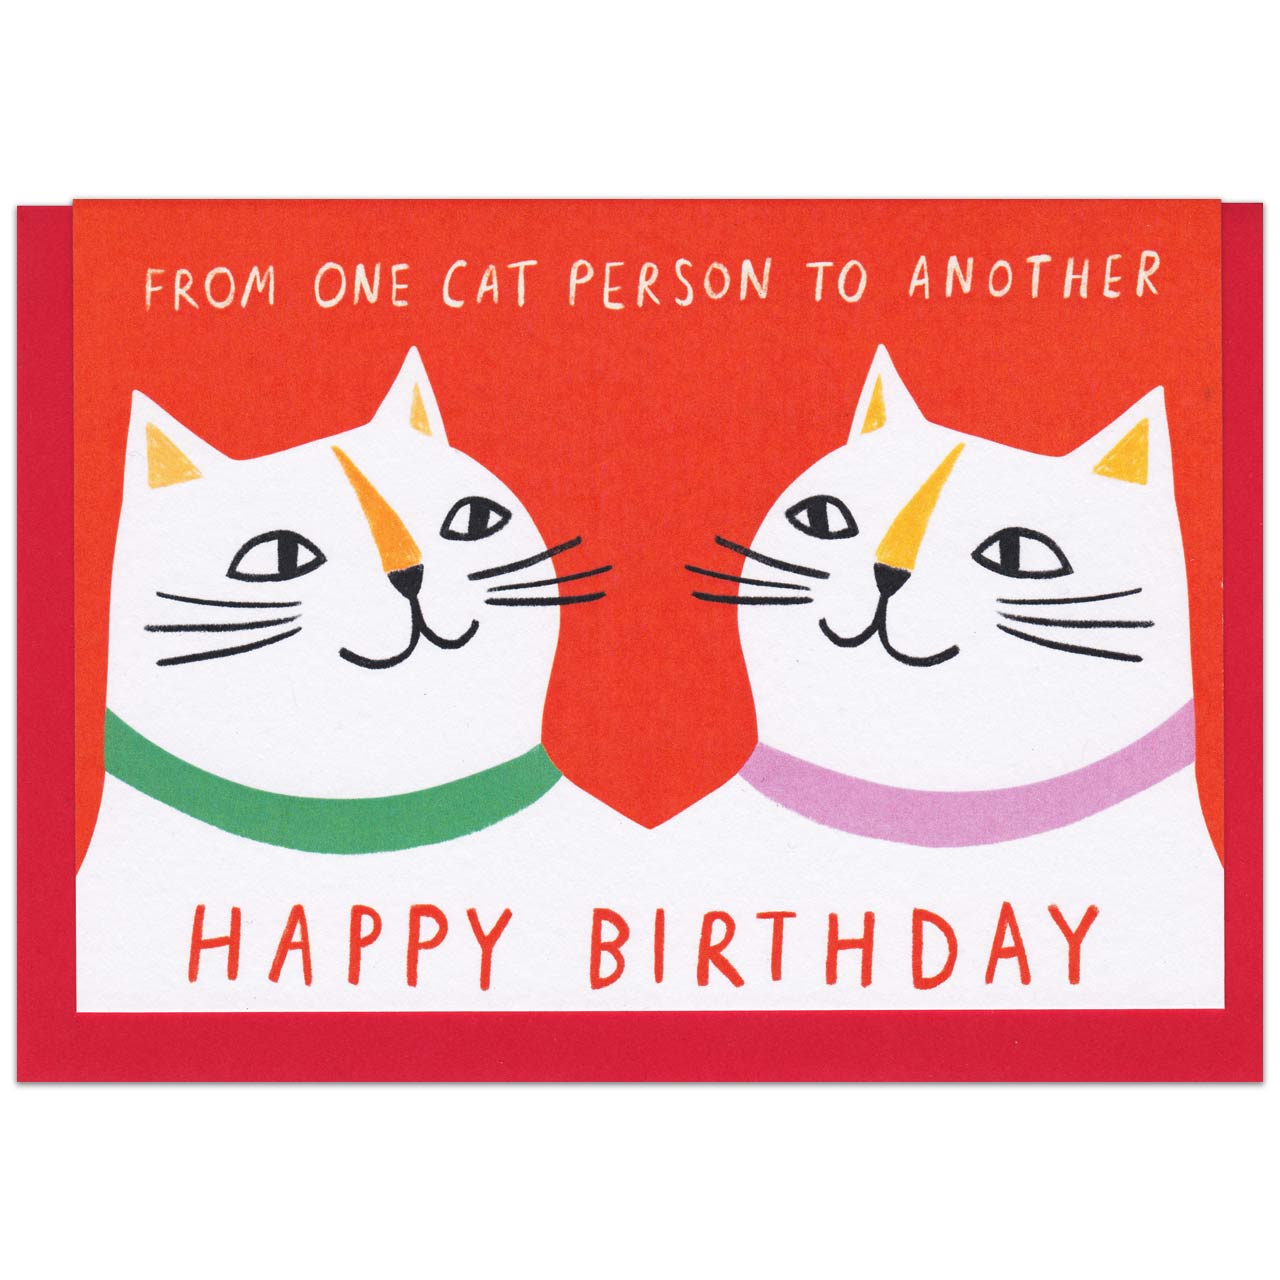 From One Cat Person to Another Birthday Card